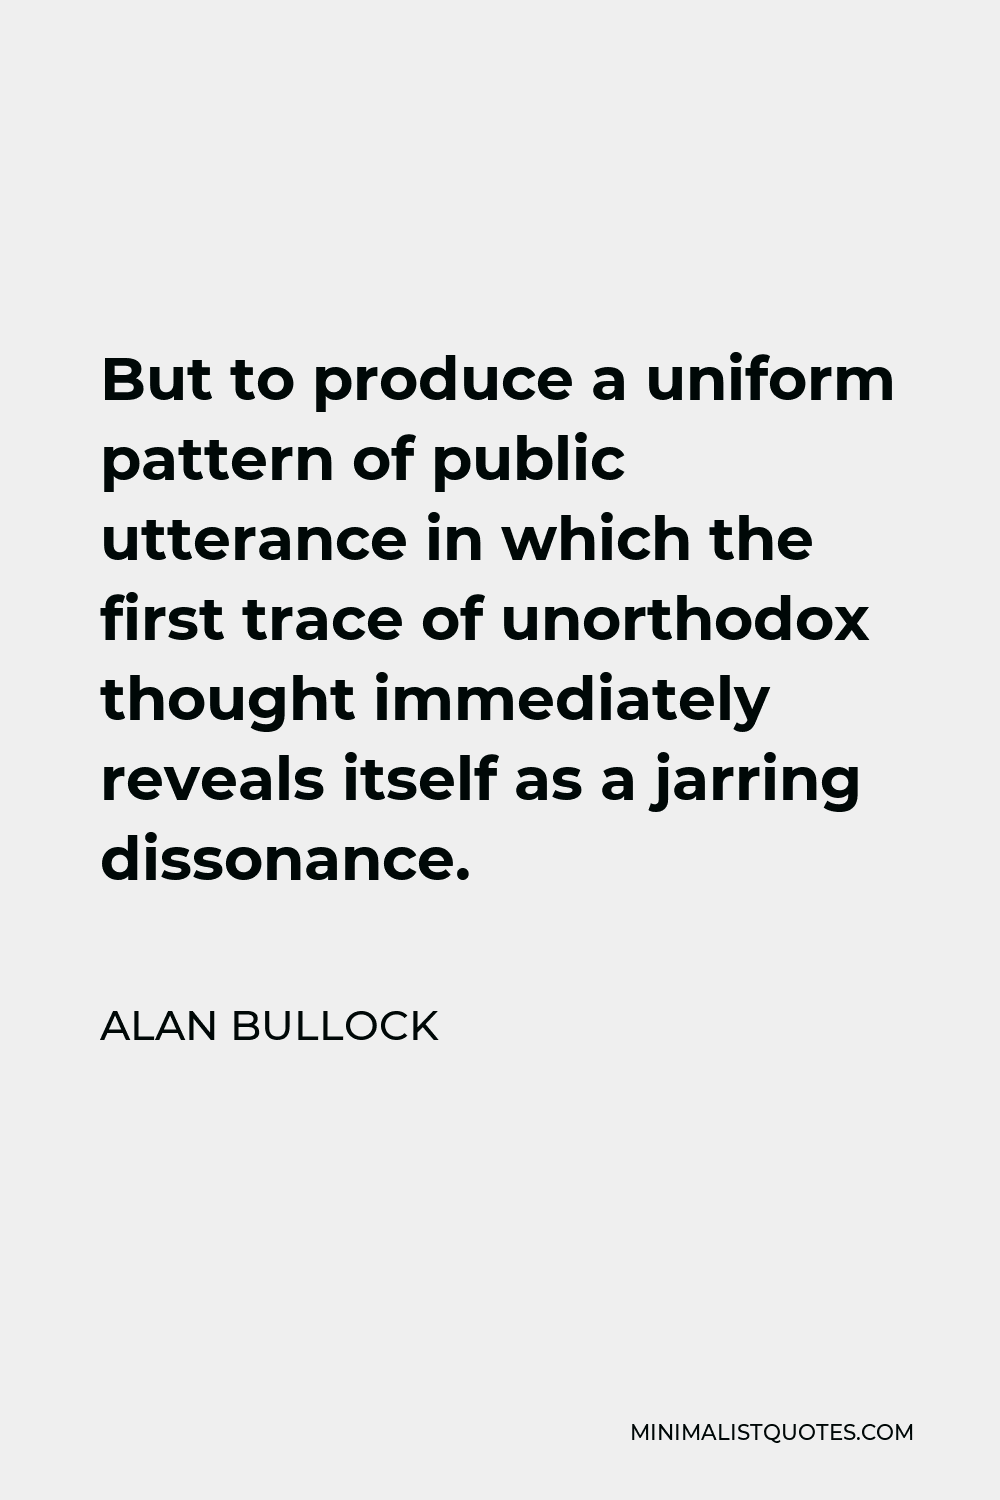 Alan Bullock Quote - But to produce a uniform pattern of public utterance in which the first trace of unorthodox thought immediately reveals itself as a jarring dissonance.